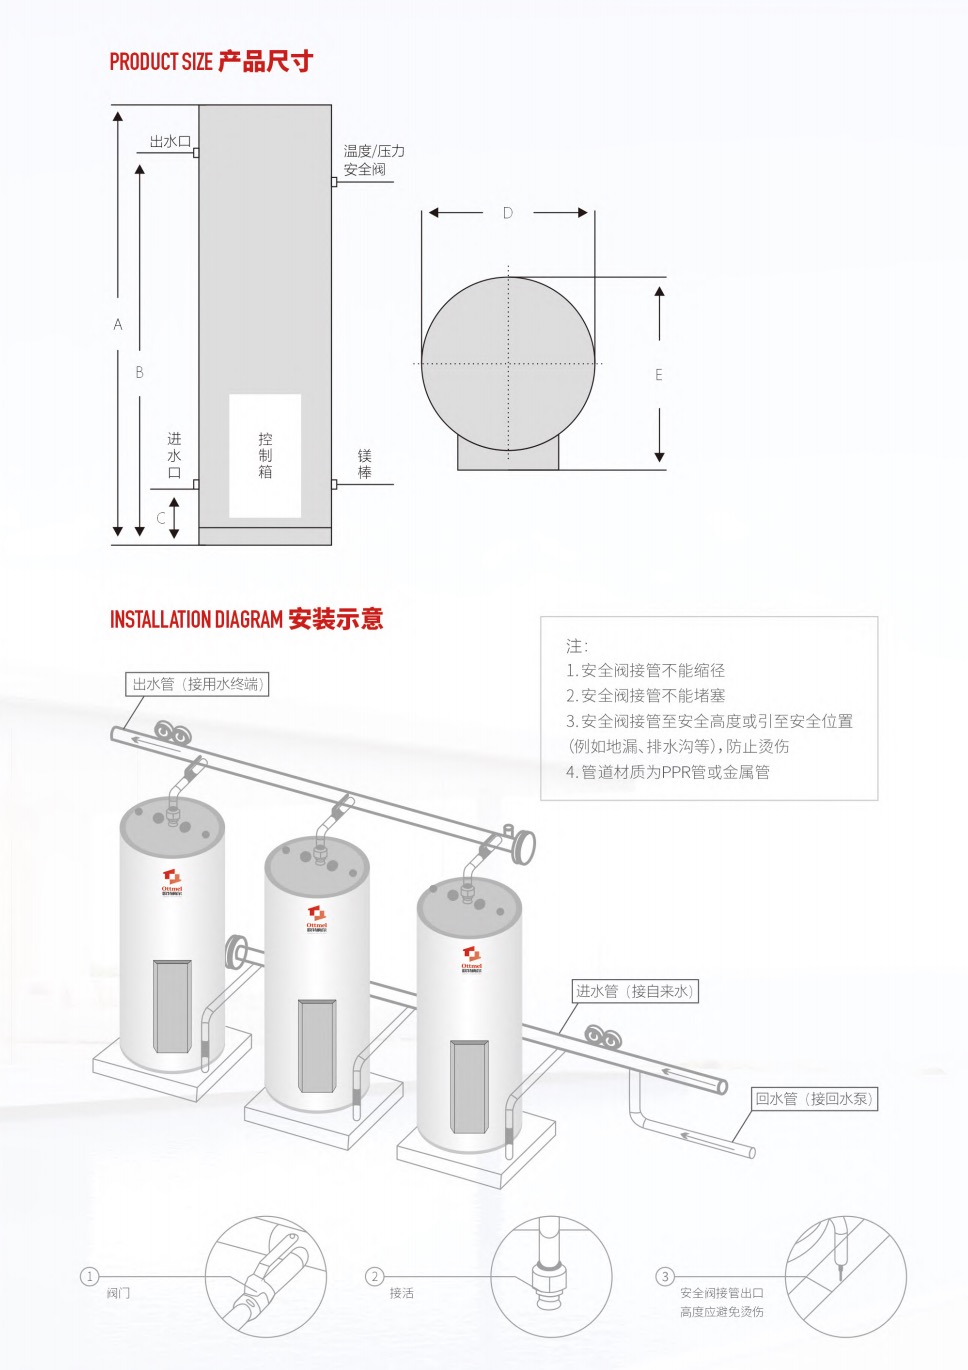 Commercial electric pot, volumetric water storage electric water heater, electric water heater, floor mounted electric heating furnace